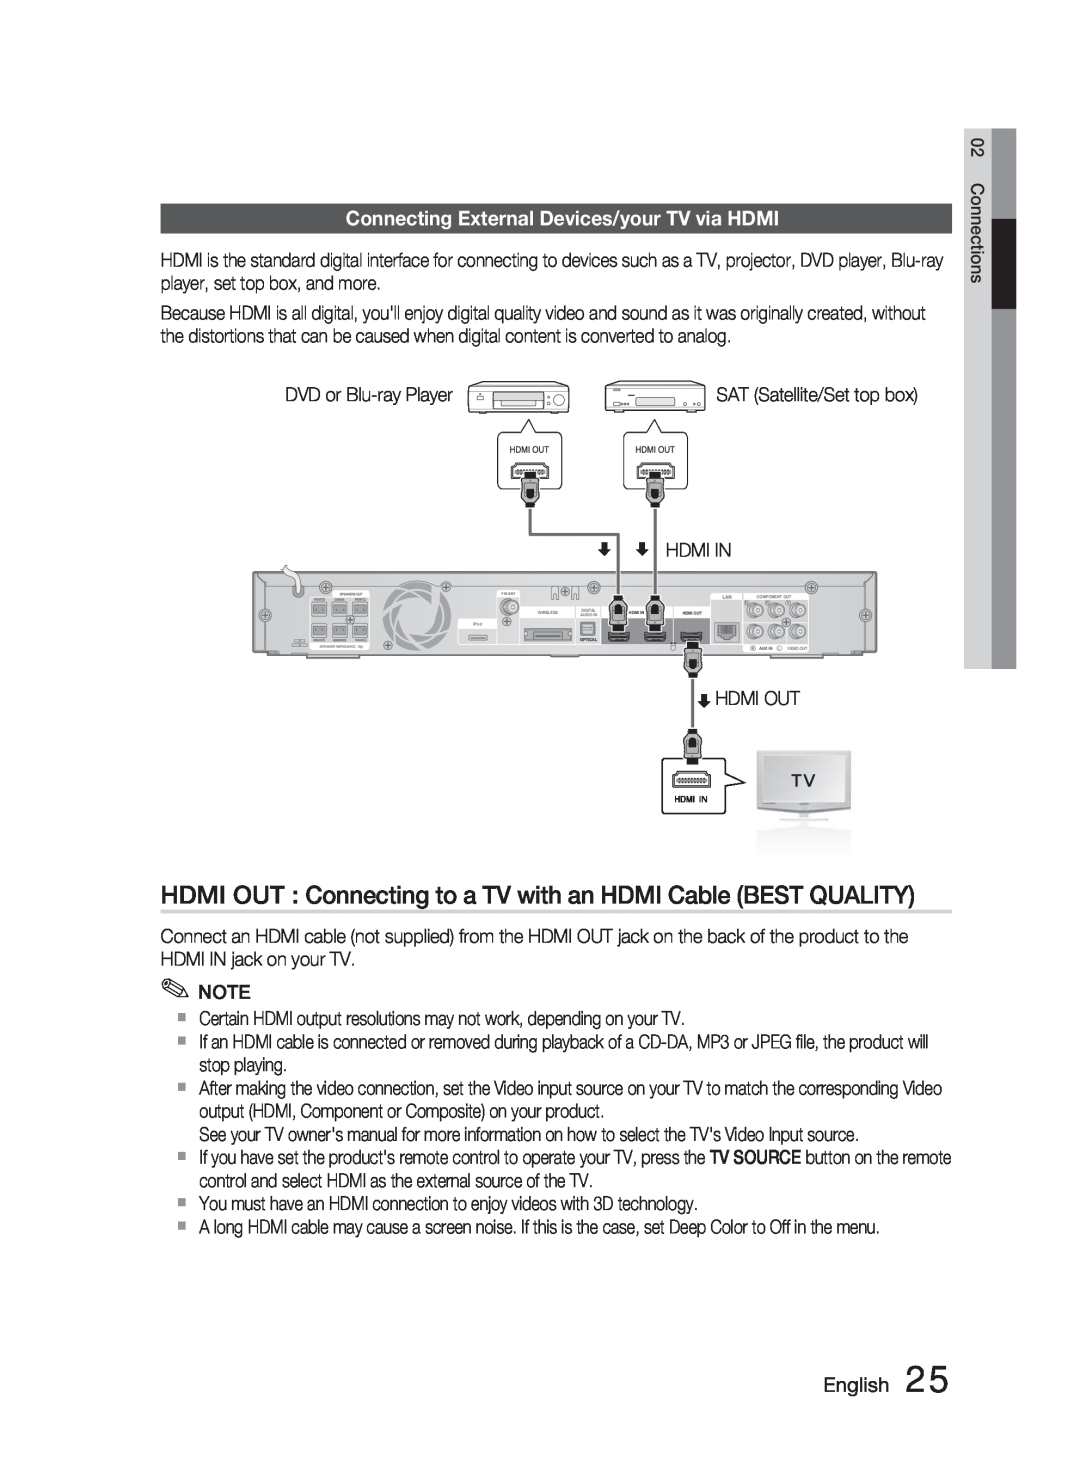 Samsung AH68-02279Y user manual Connecting External Devices/your TV via HDMI, English 